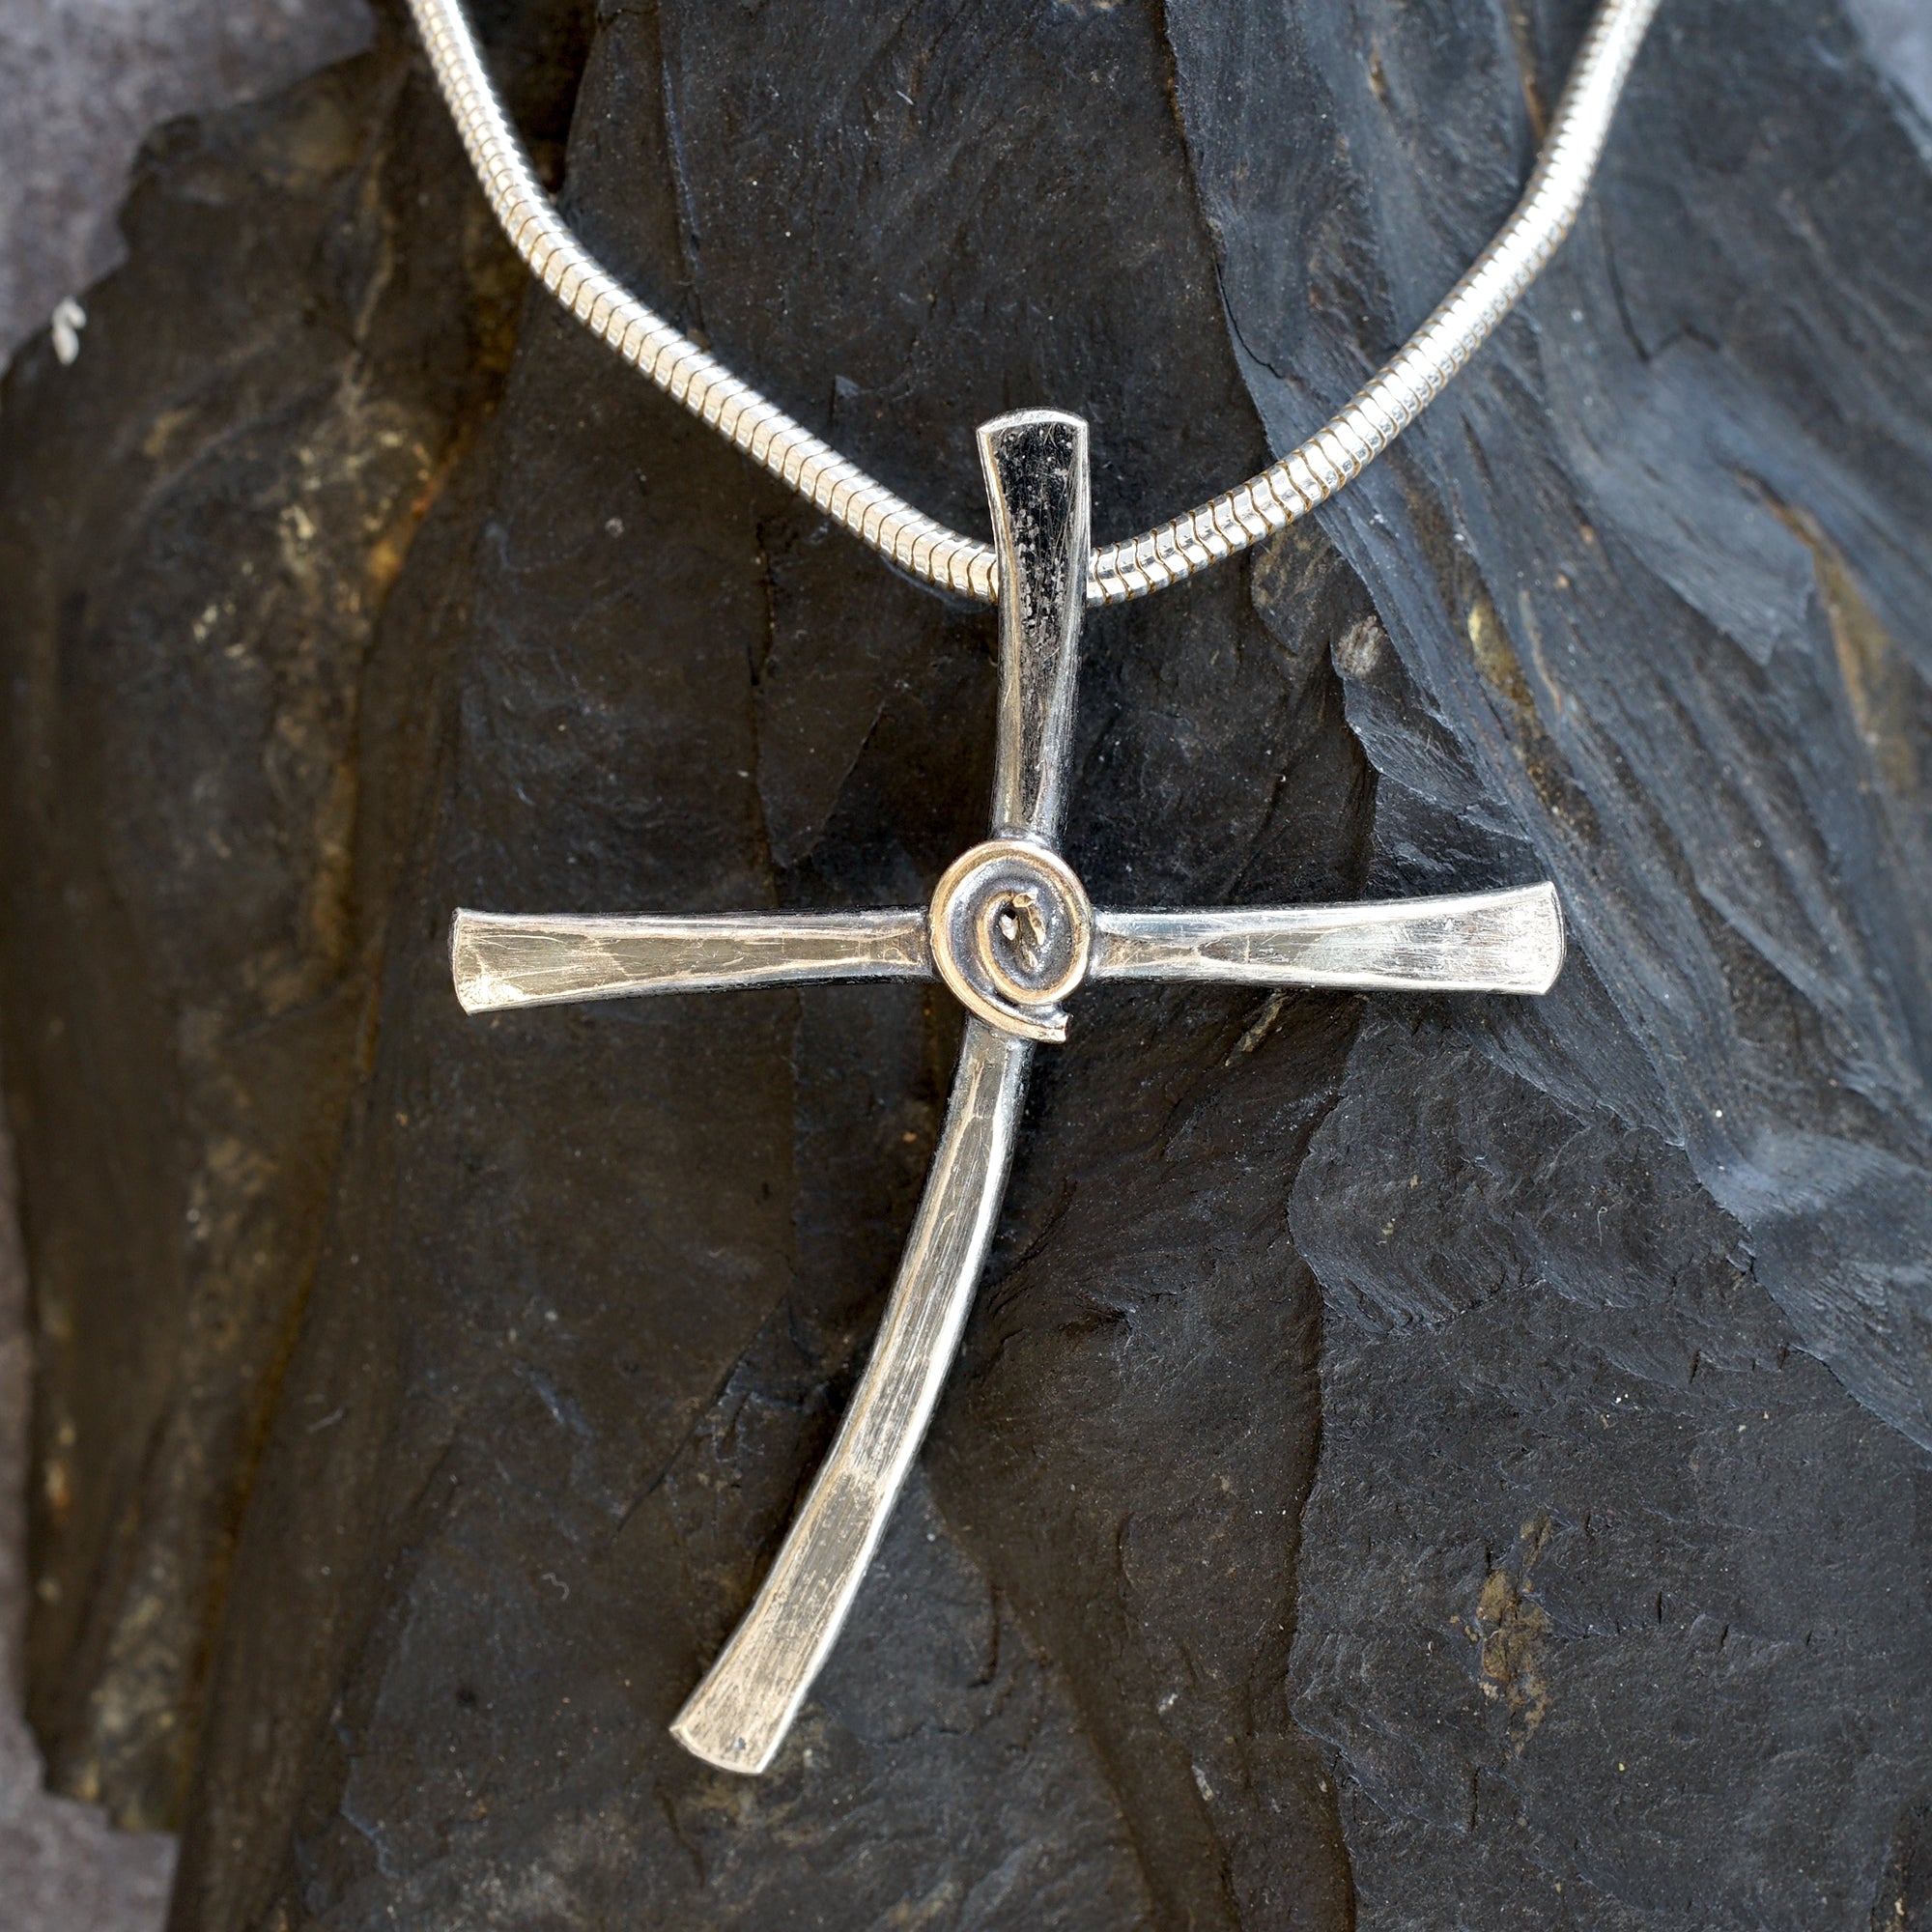 Sterling Silver and 9ct gold cross from Angela Kelly Jewellery Enniskillen Fermanagh